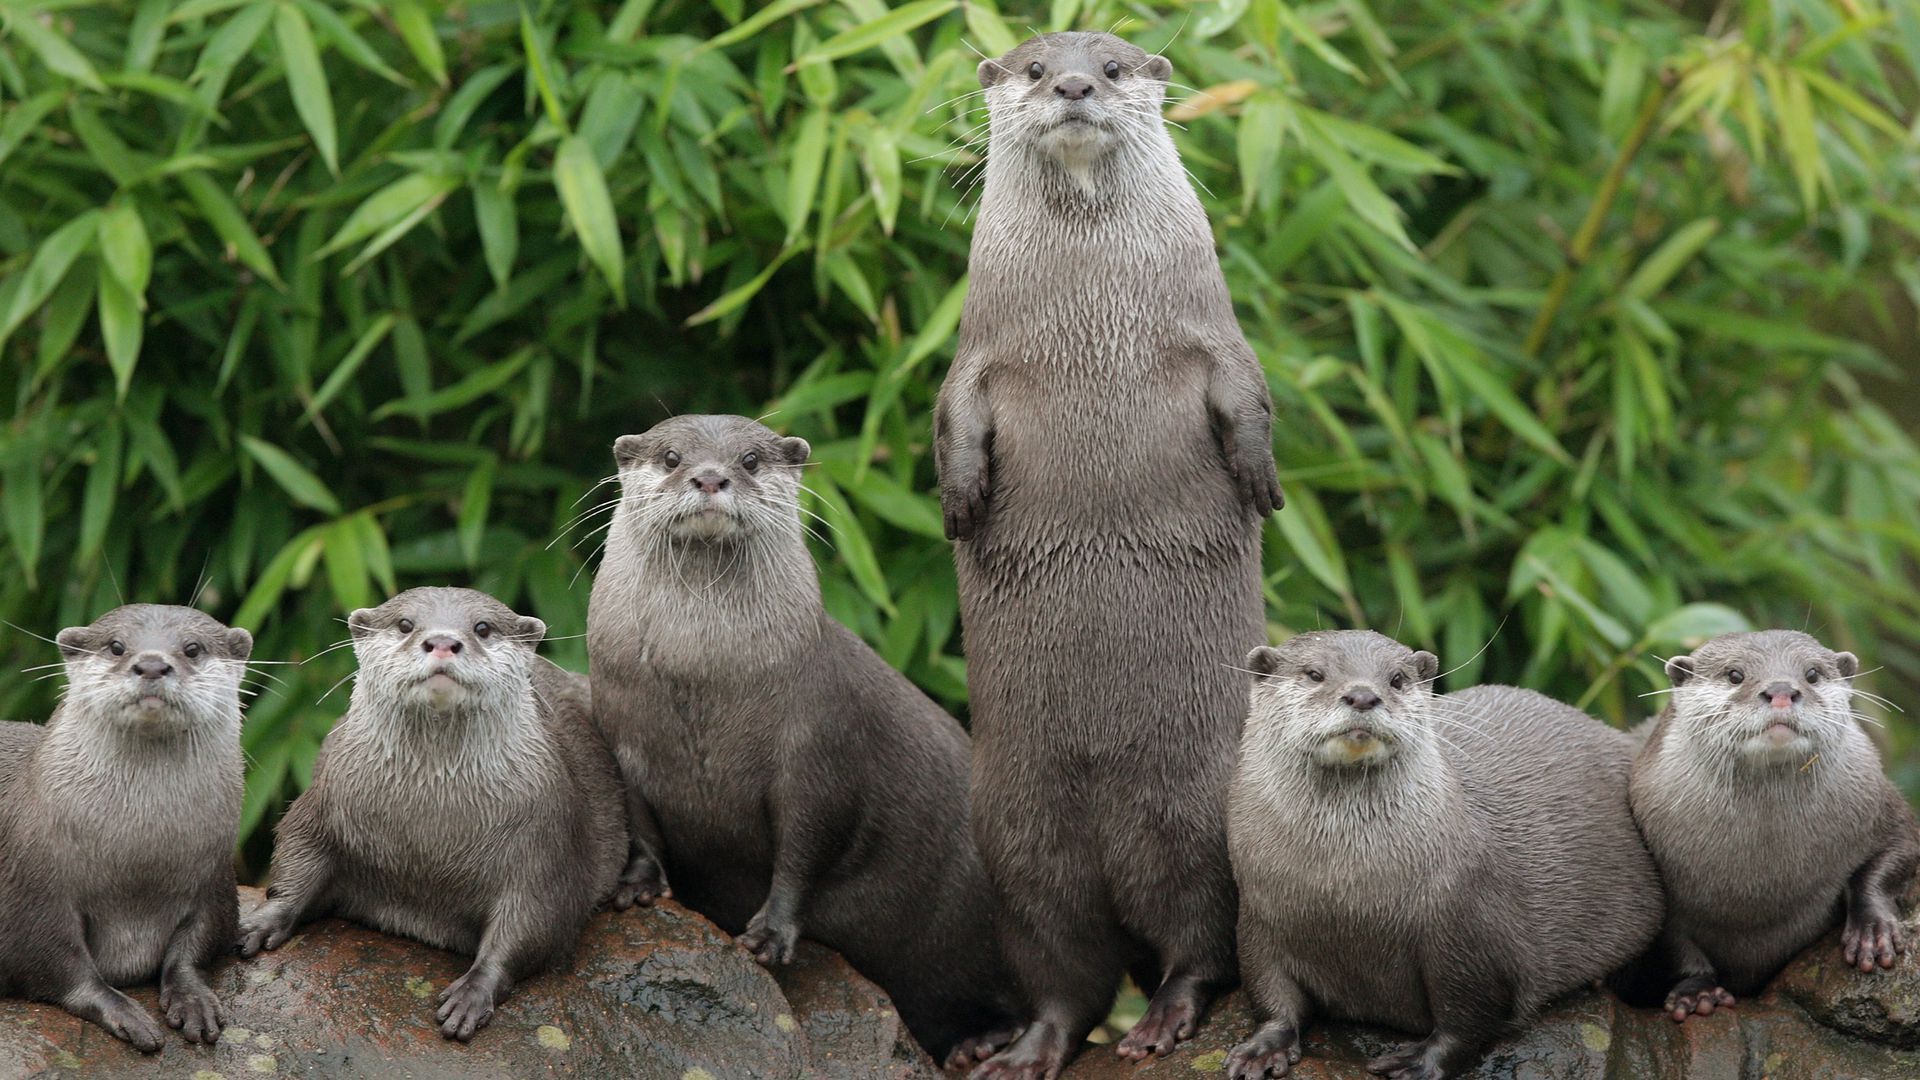 A photo of otters